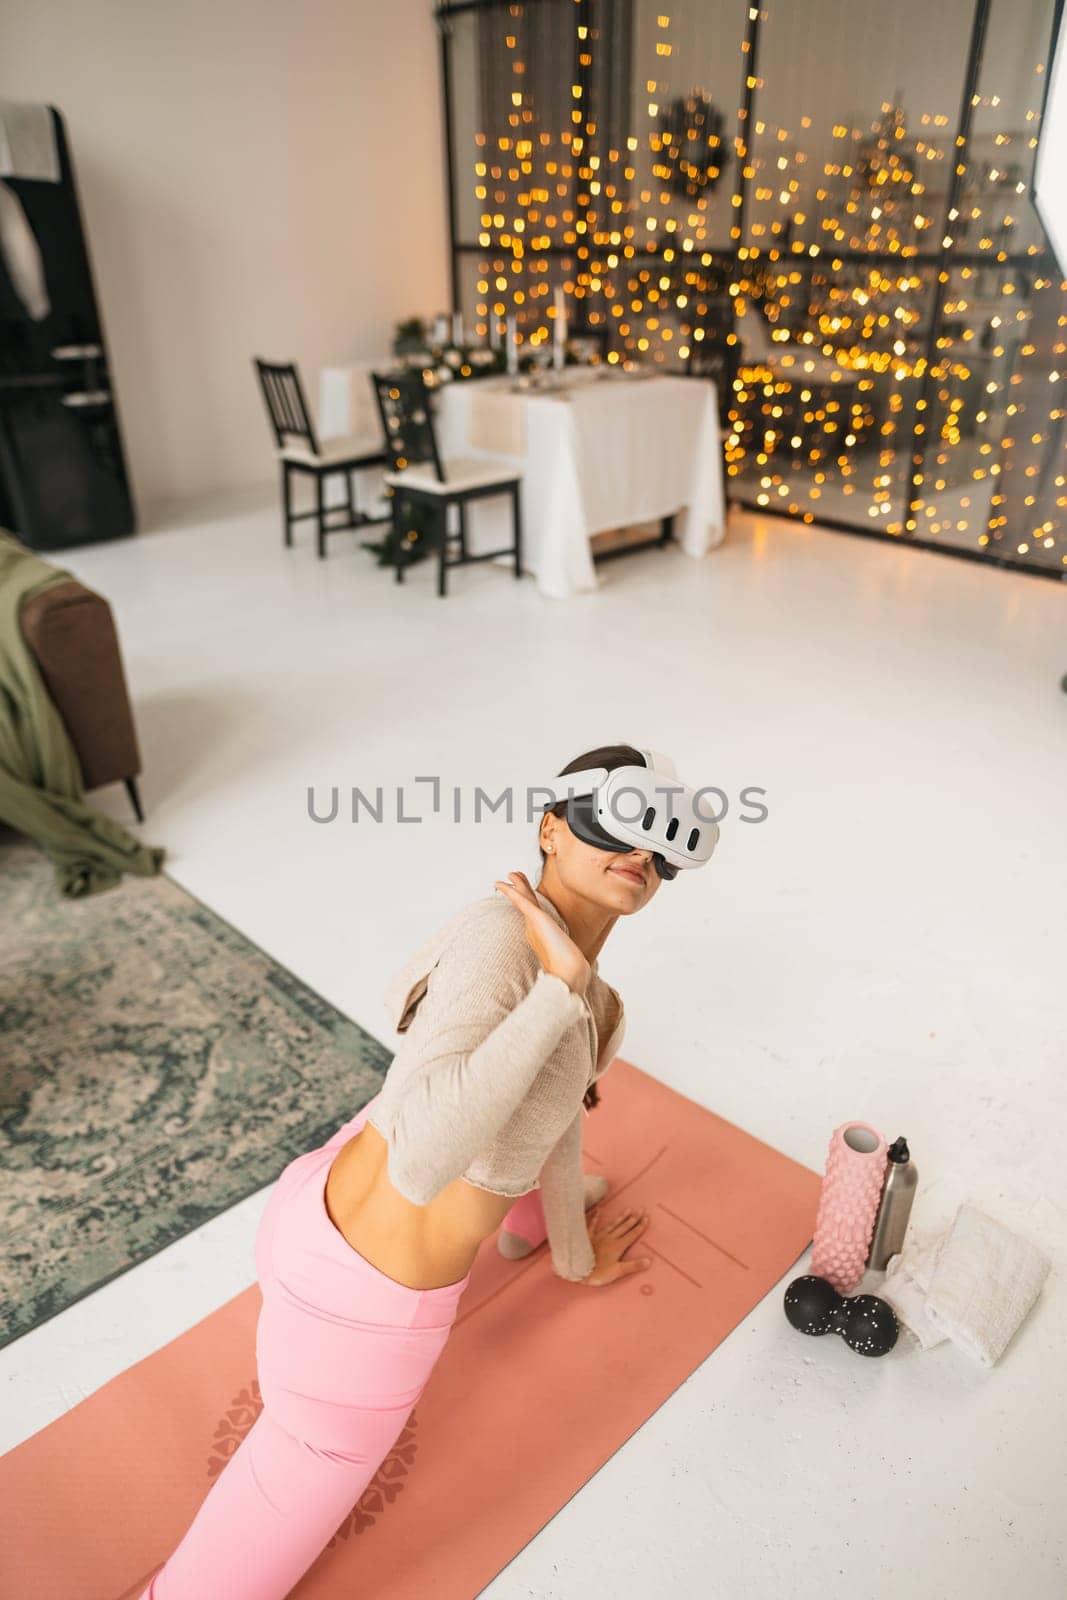 Stretching exercises for the arms during at-home workouts with a virtual reality headset amidst the Christmas celebrations. High quality photo